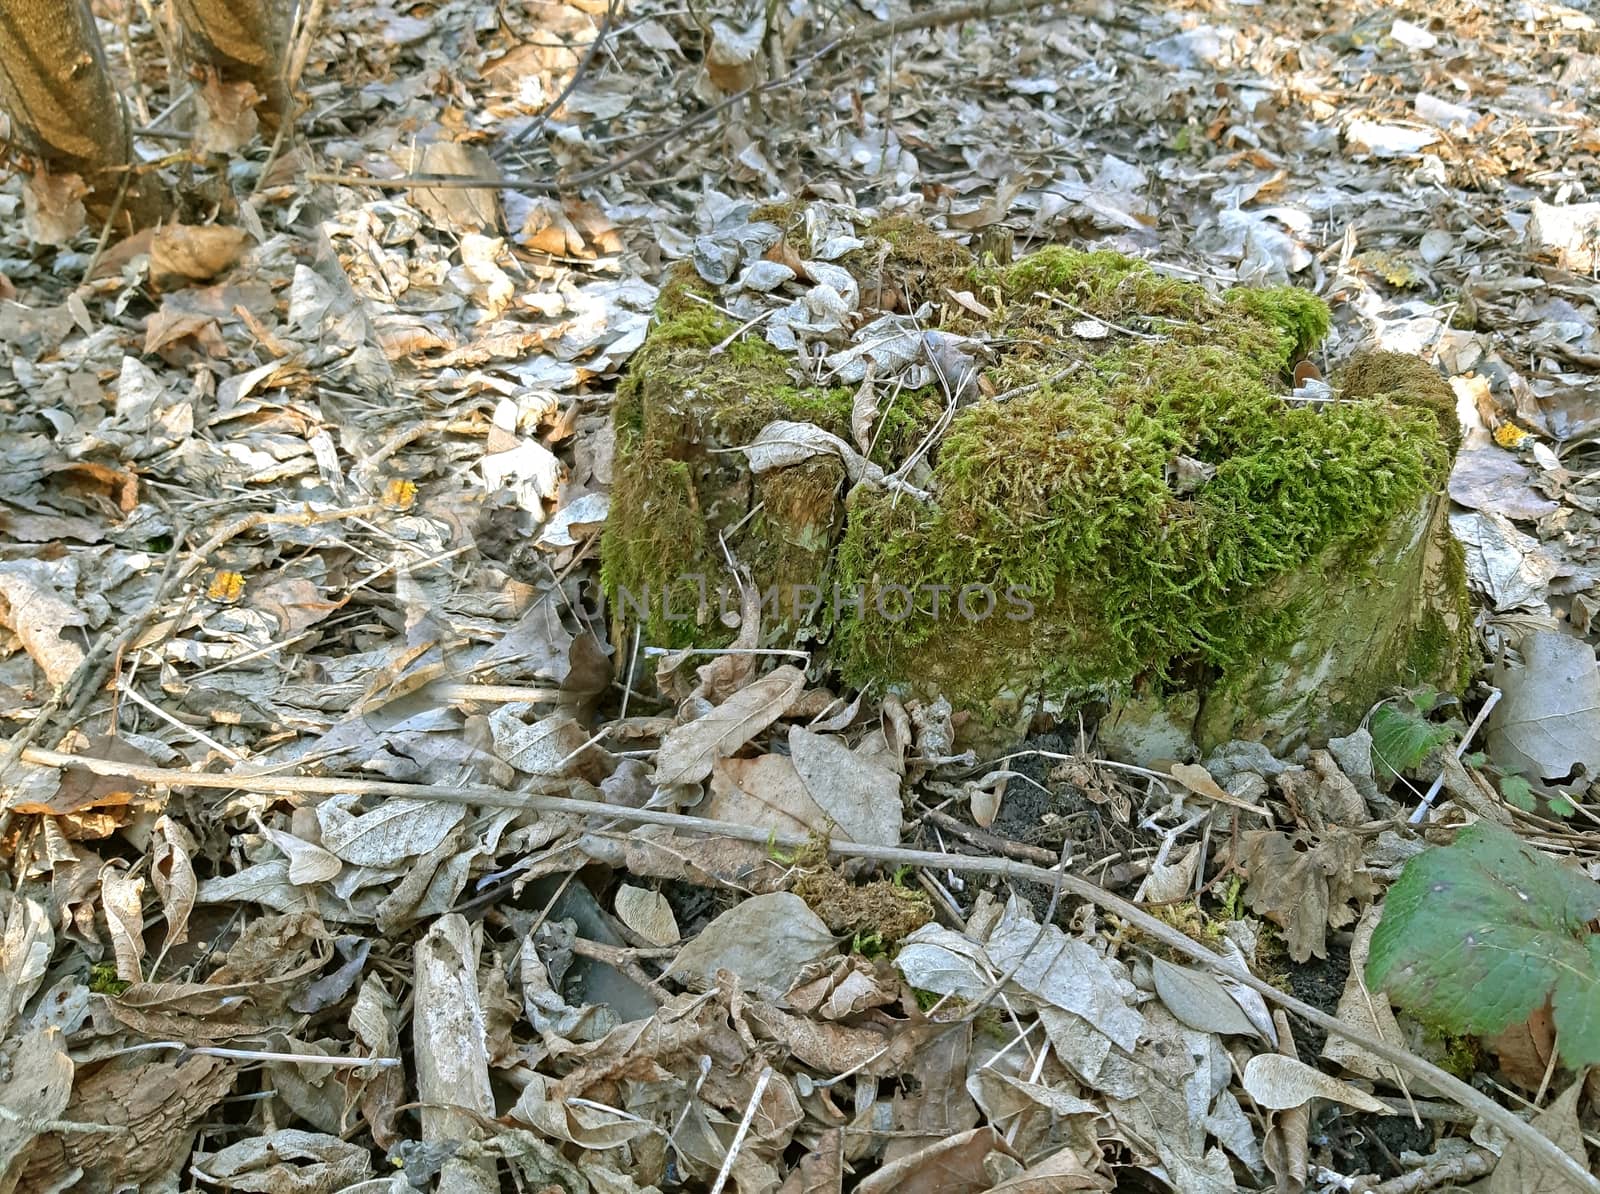 Moss growing on a stump in the forest by Mindru